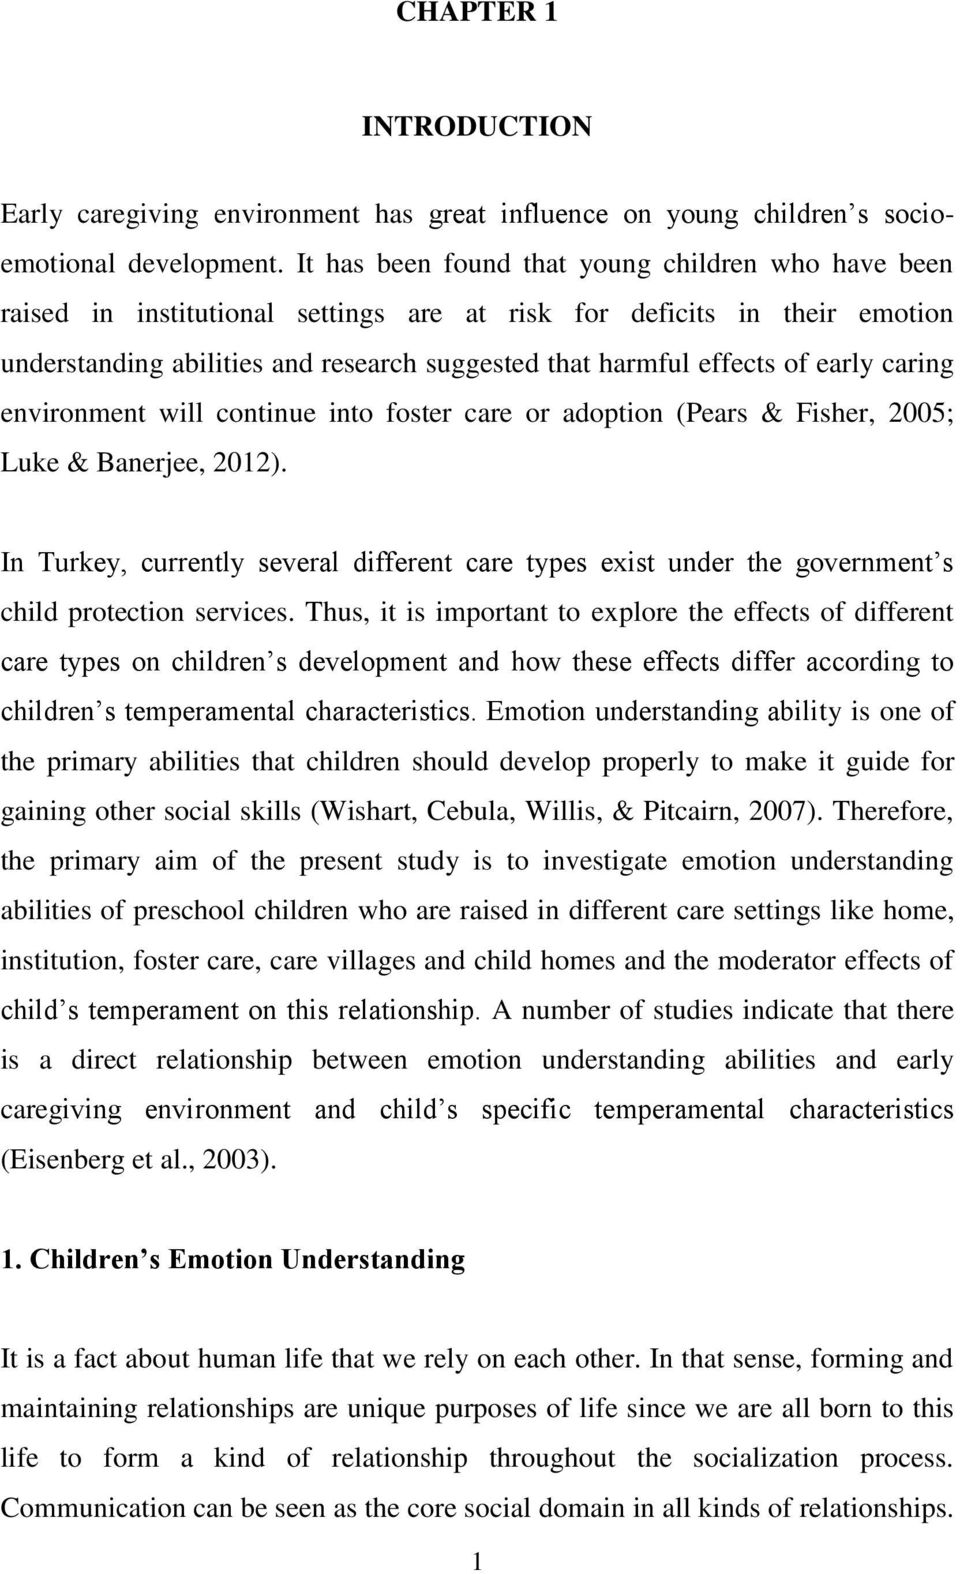 early caring environment will continue into foster care or adoption (Pears & Fisher, 2005; Luke & Banerjee, 2012).